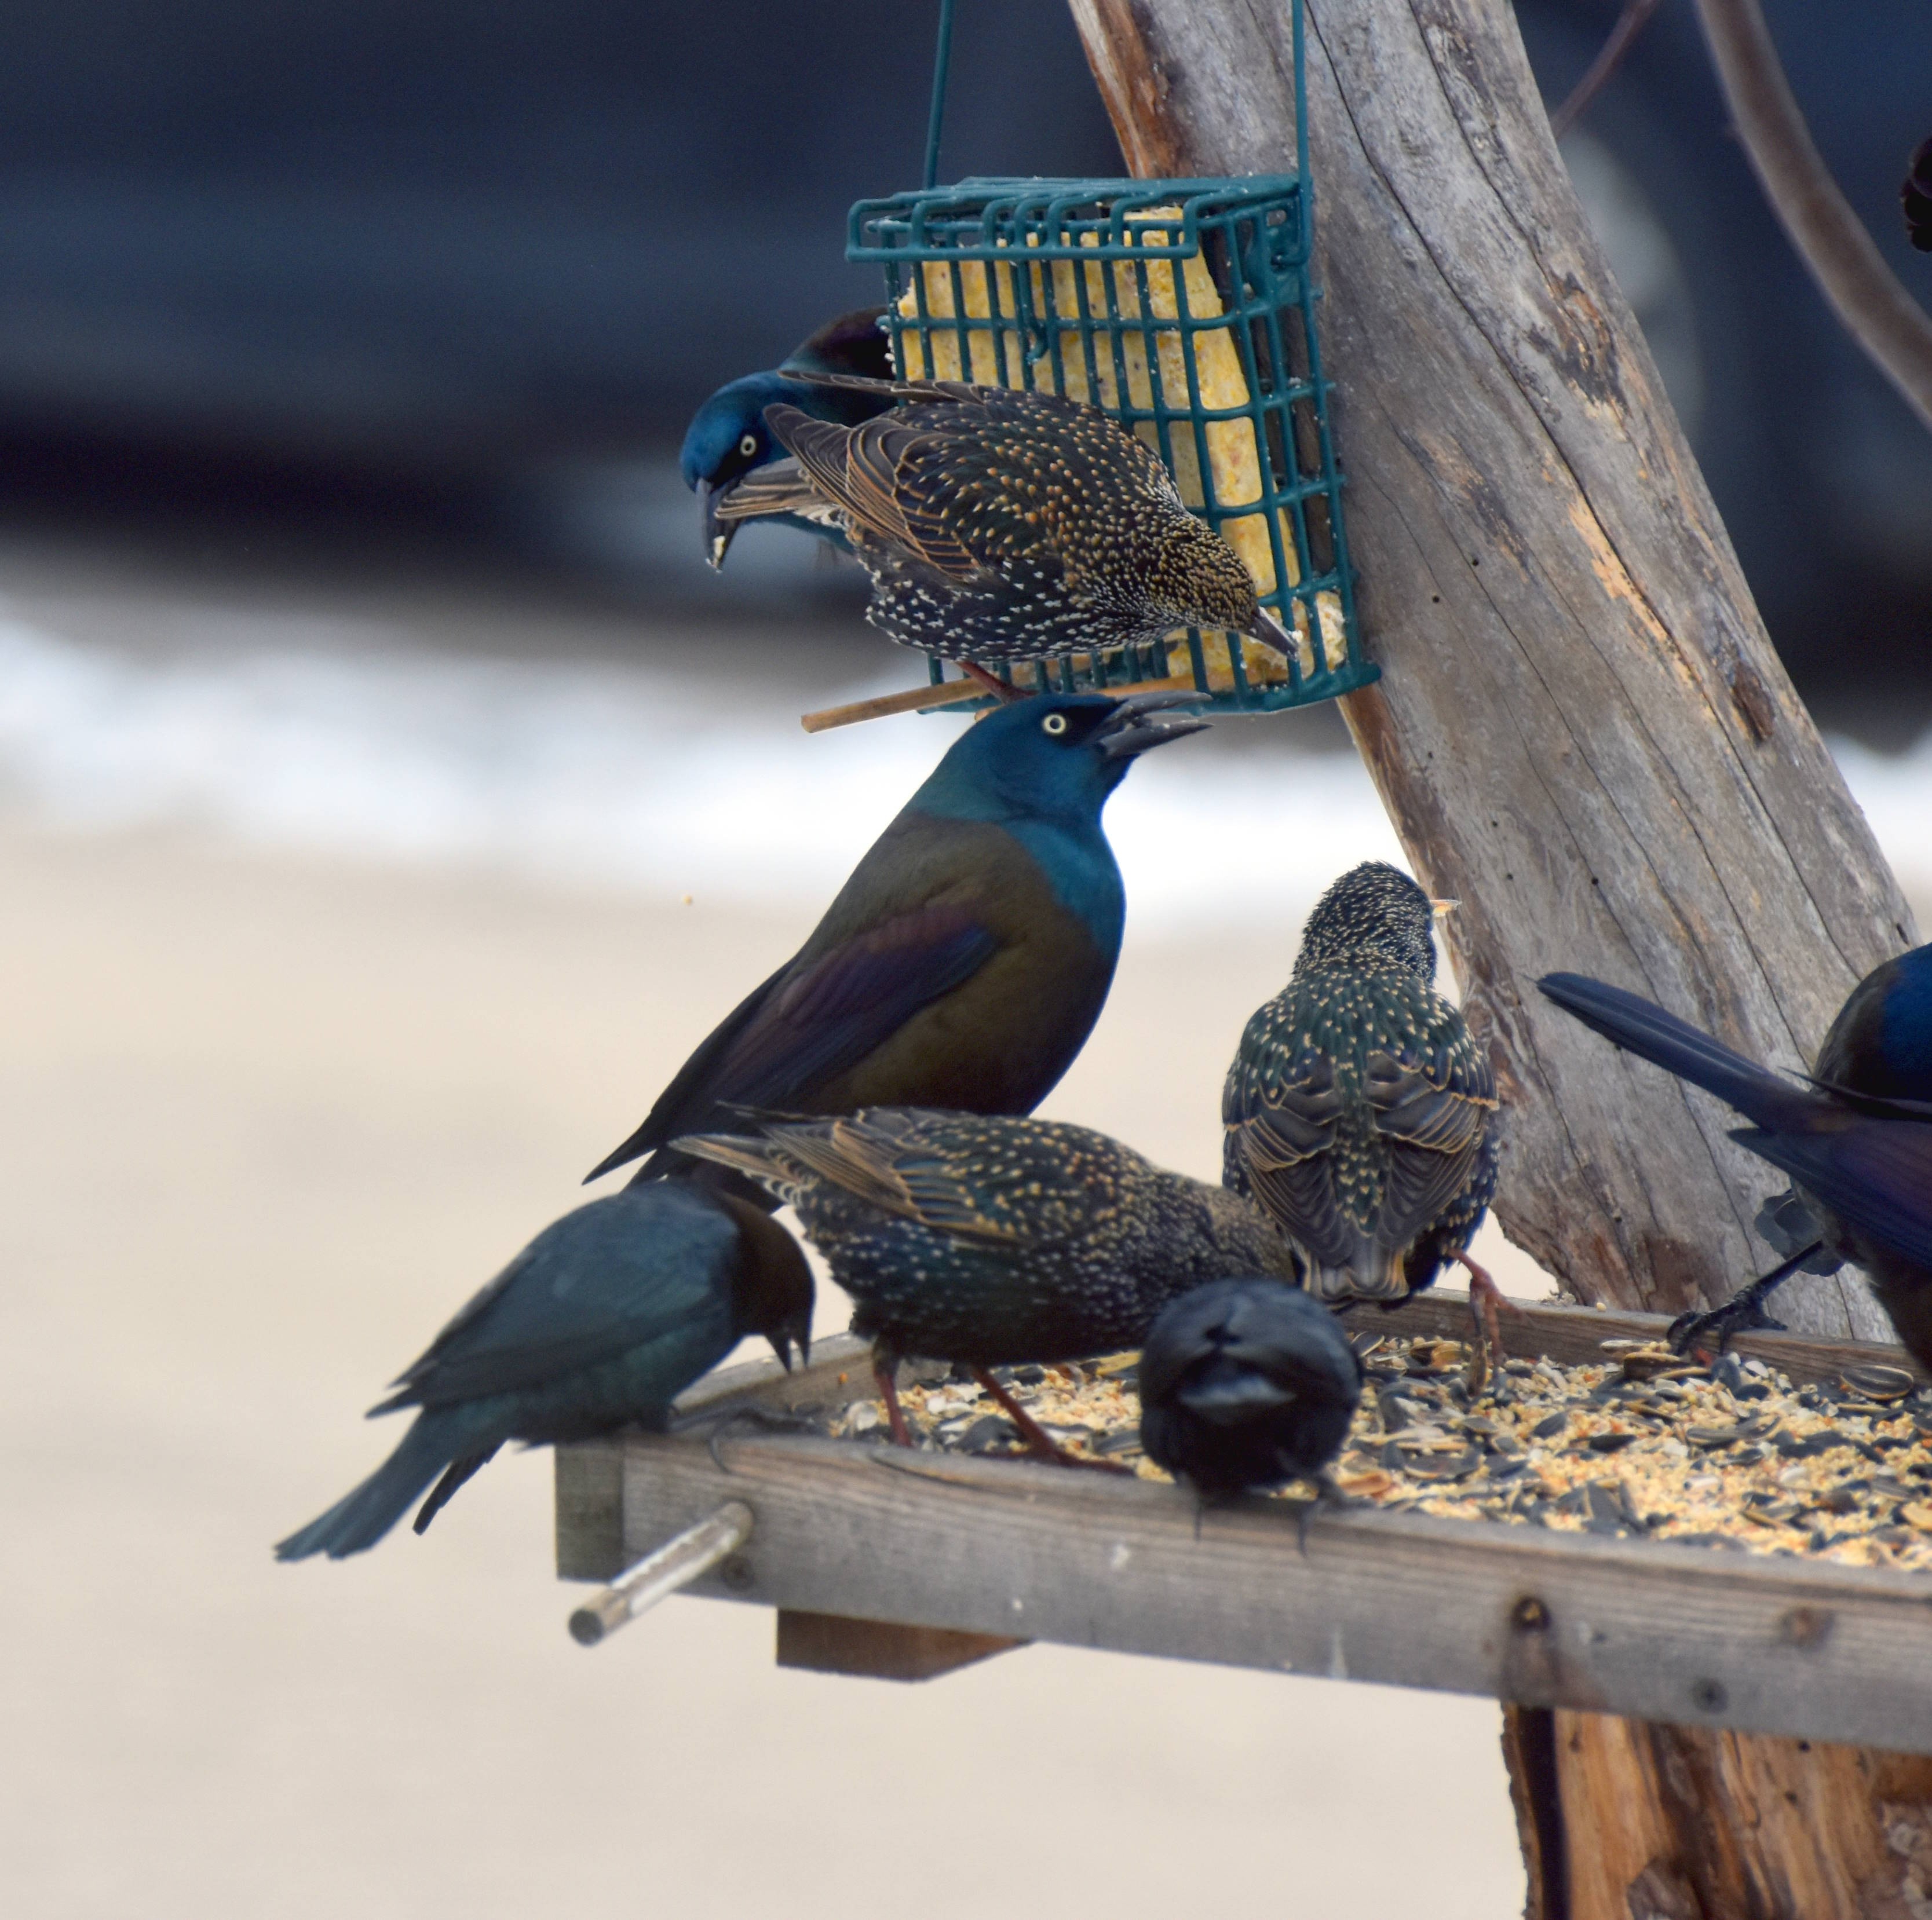 Grackles and starlings | image tagged in grackles and starlings,kewlew,nikon d3400 | made w/ Imgflip meme maker